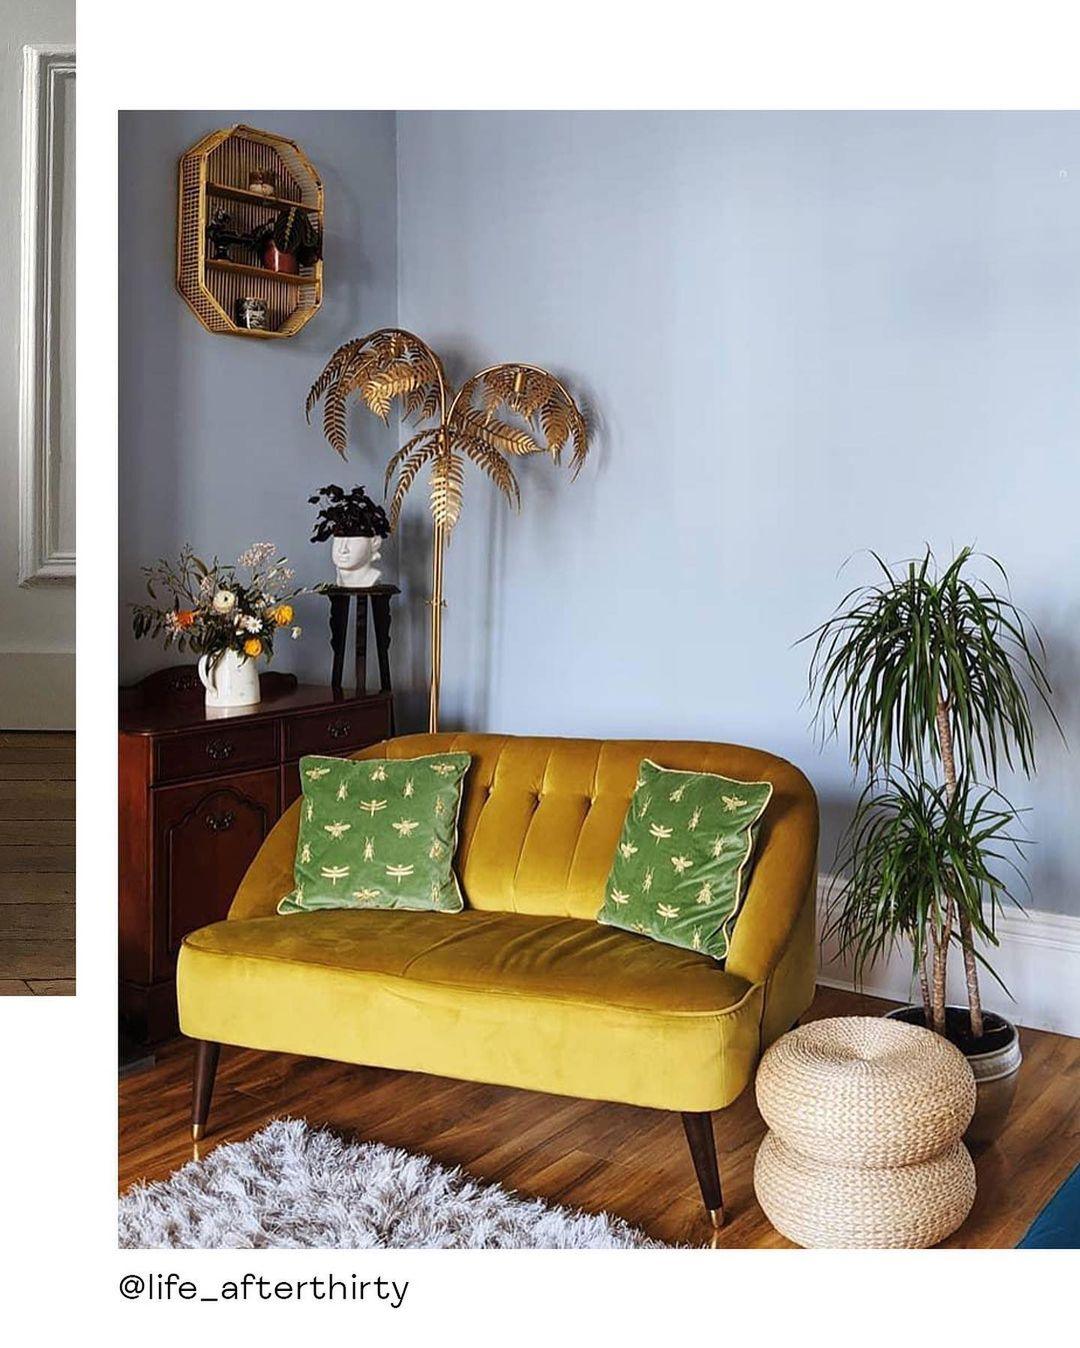 Buying-a-Sofa-Online-Pros-Cons-and-What-to-Look-For